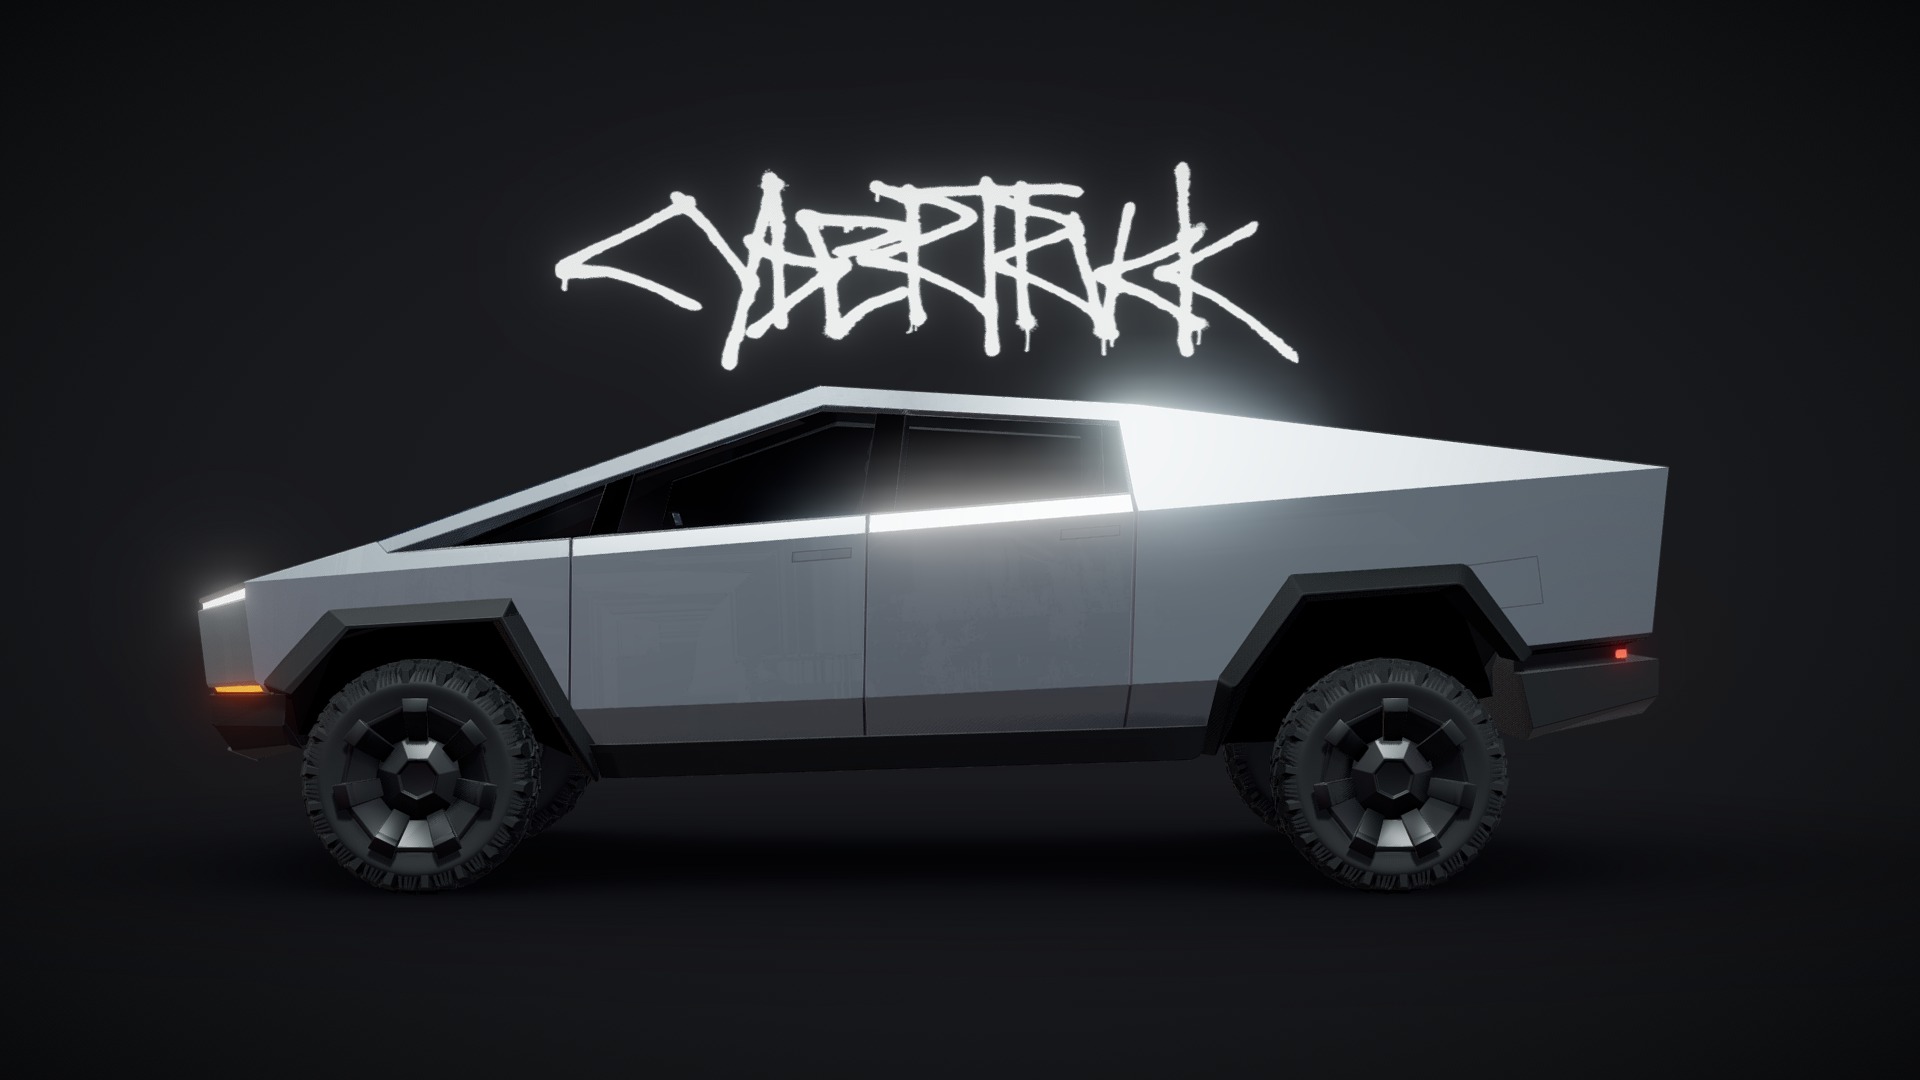 3D model Tesla – Cybertruck - This is a 3D model of the Tesla - Cybertruck. The 3D model is about a white car with a black background.